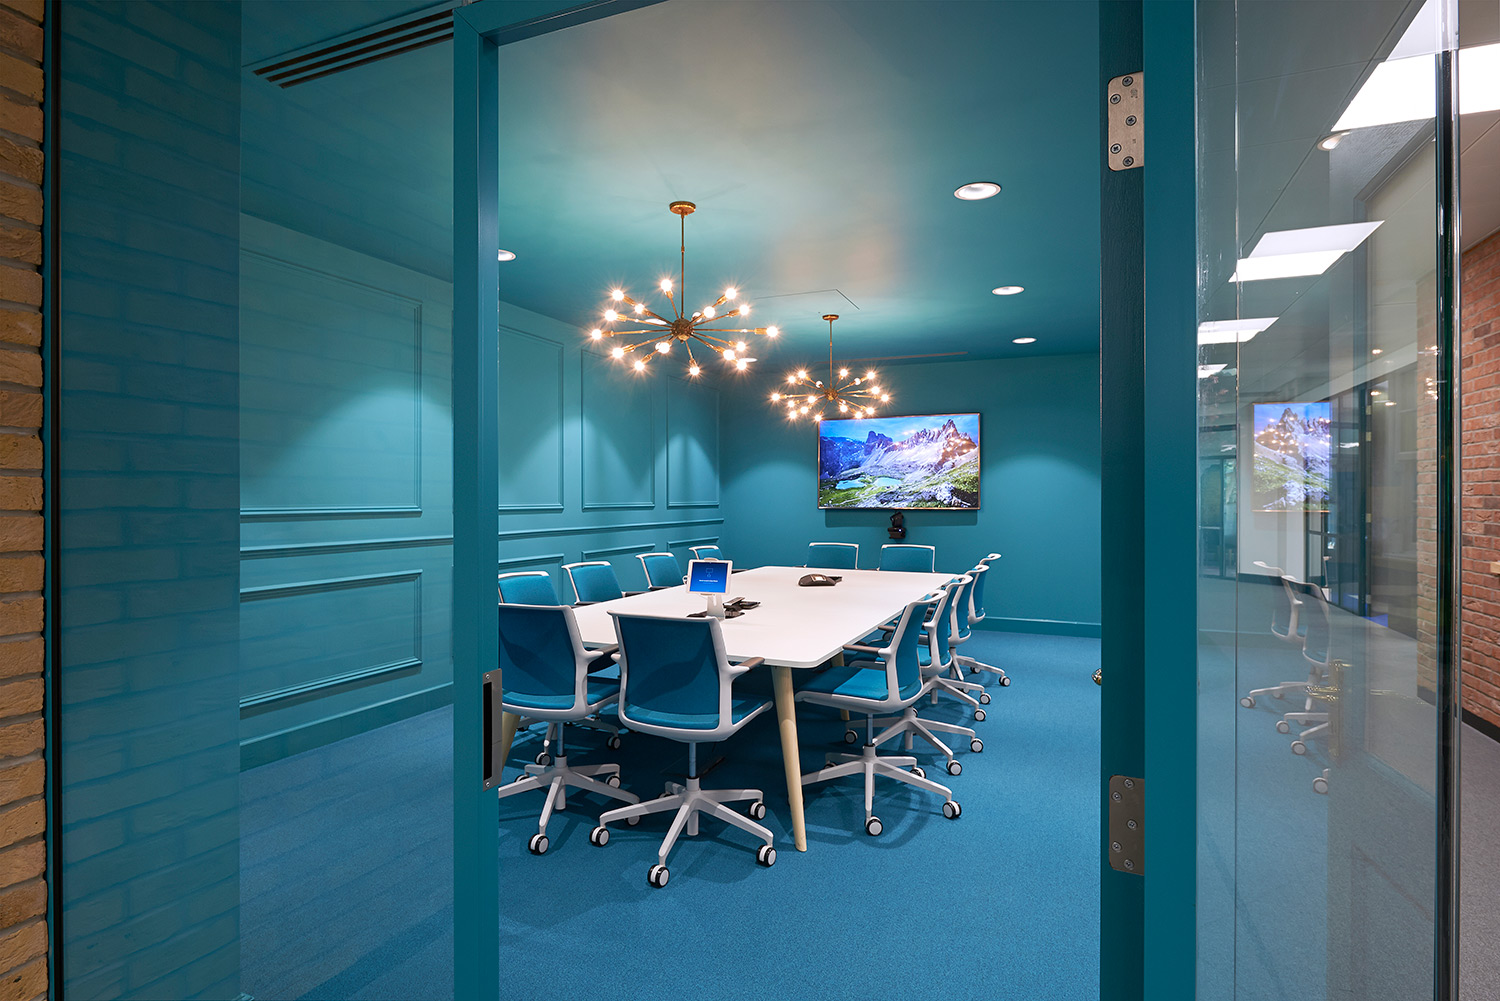 New Homes Law Office Fit-Out Spacio